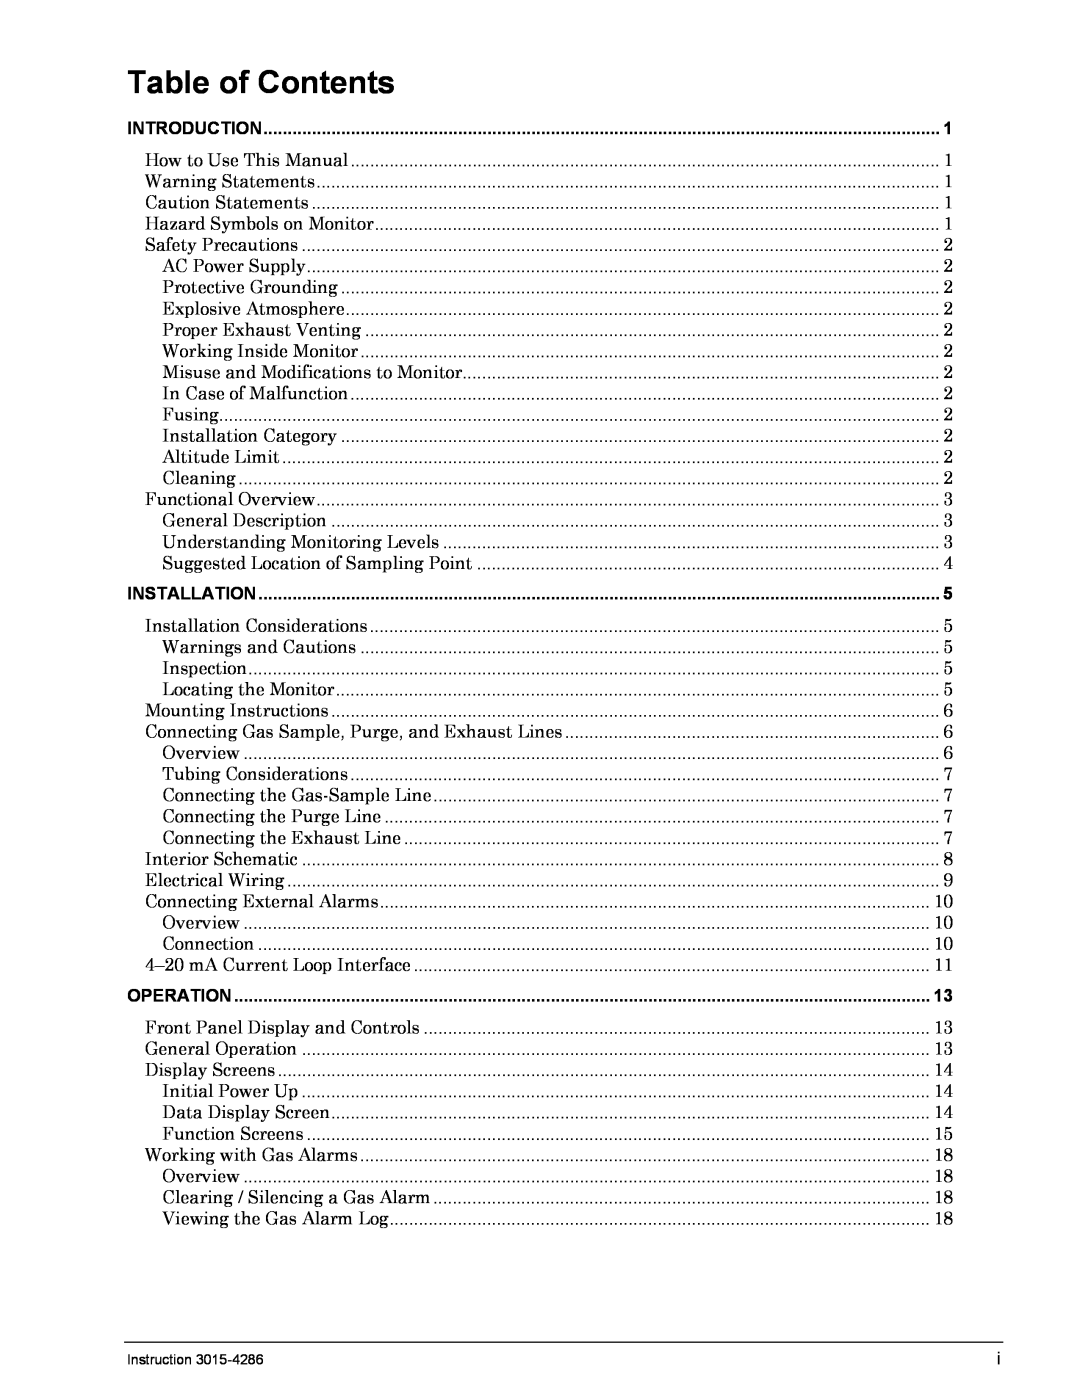 Bacharach 3015-4286 manual Table of Contents 